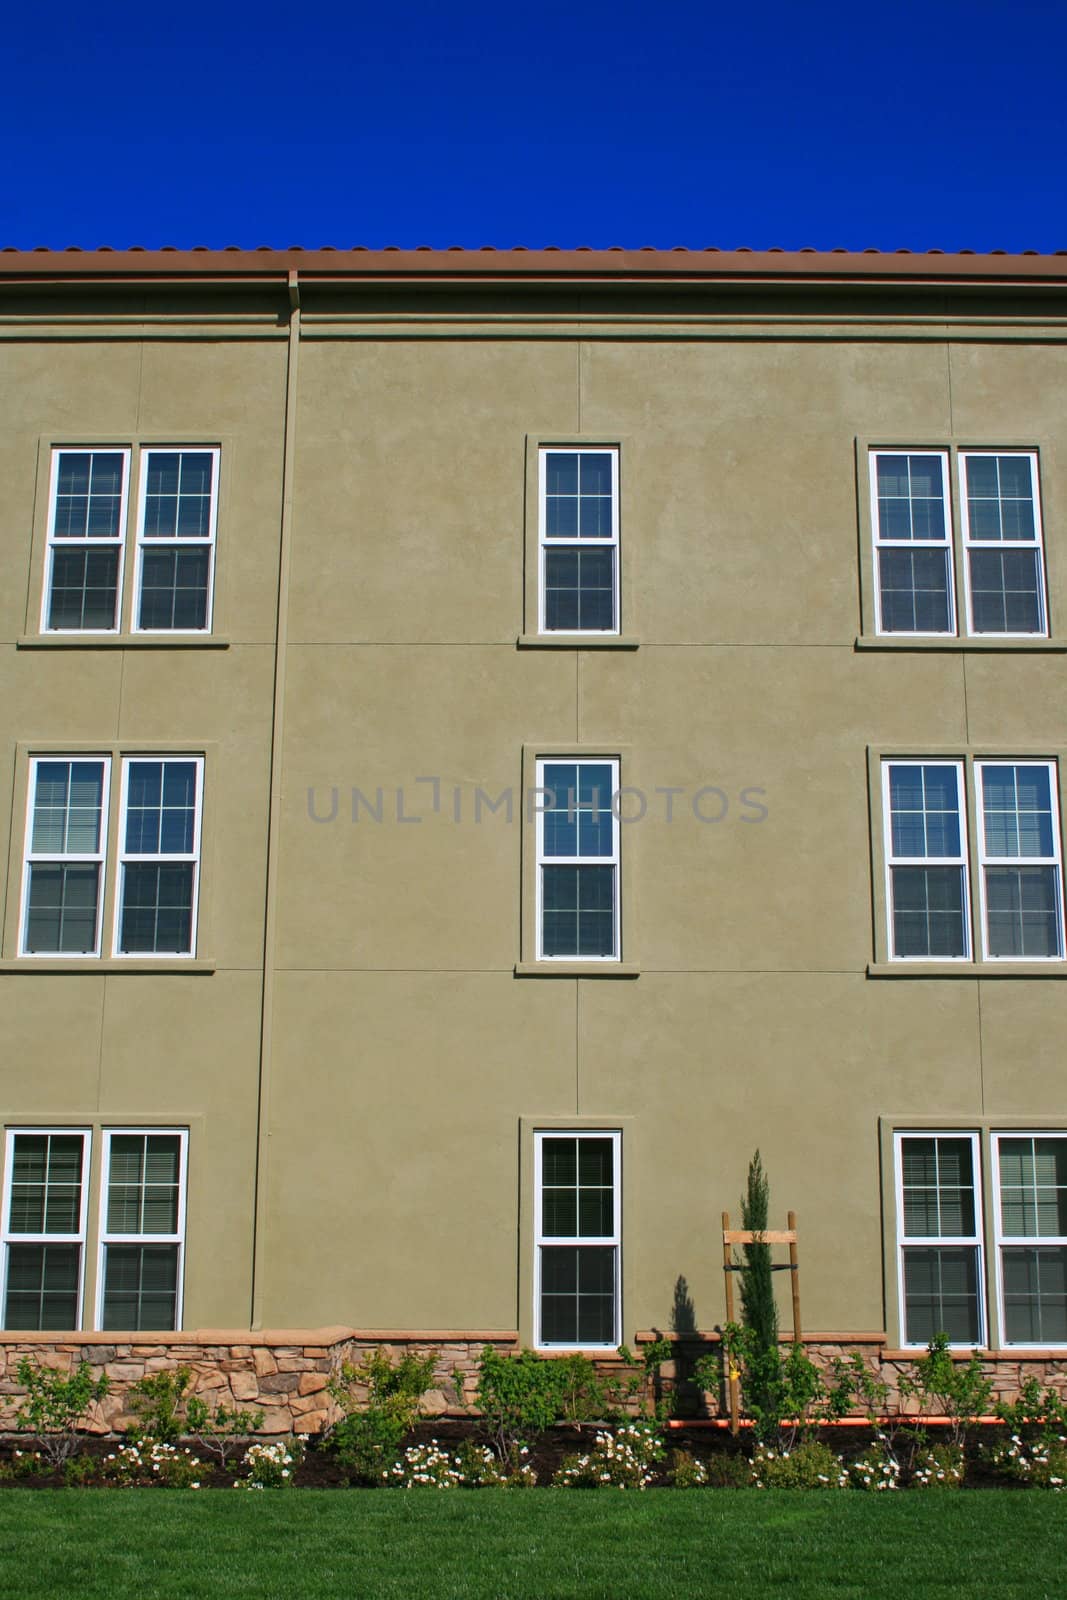 Close up of the windows of a building.
